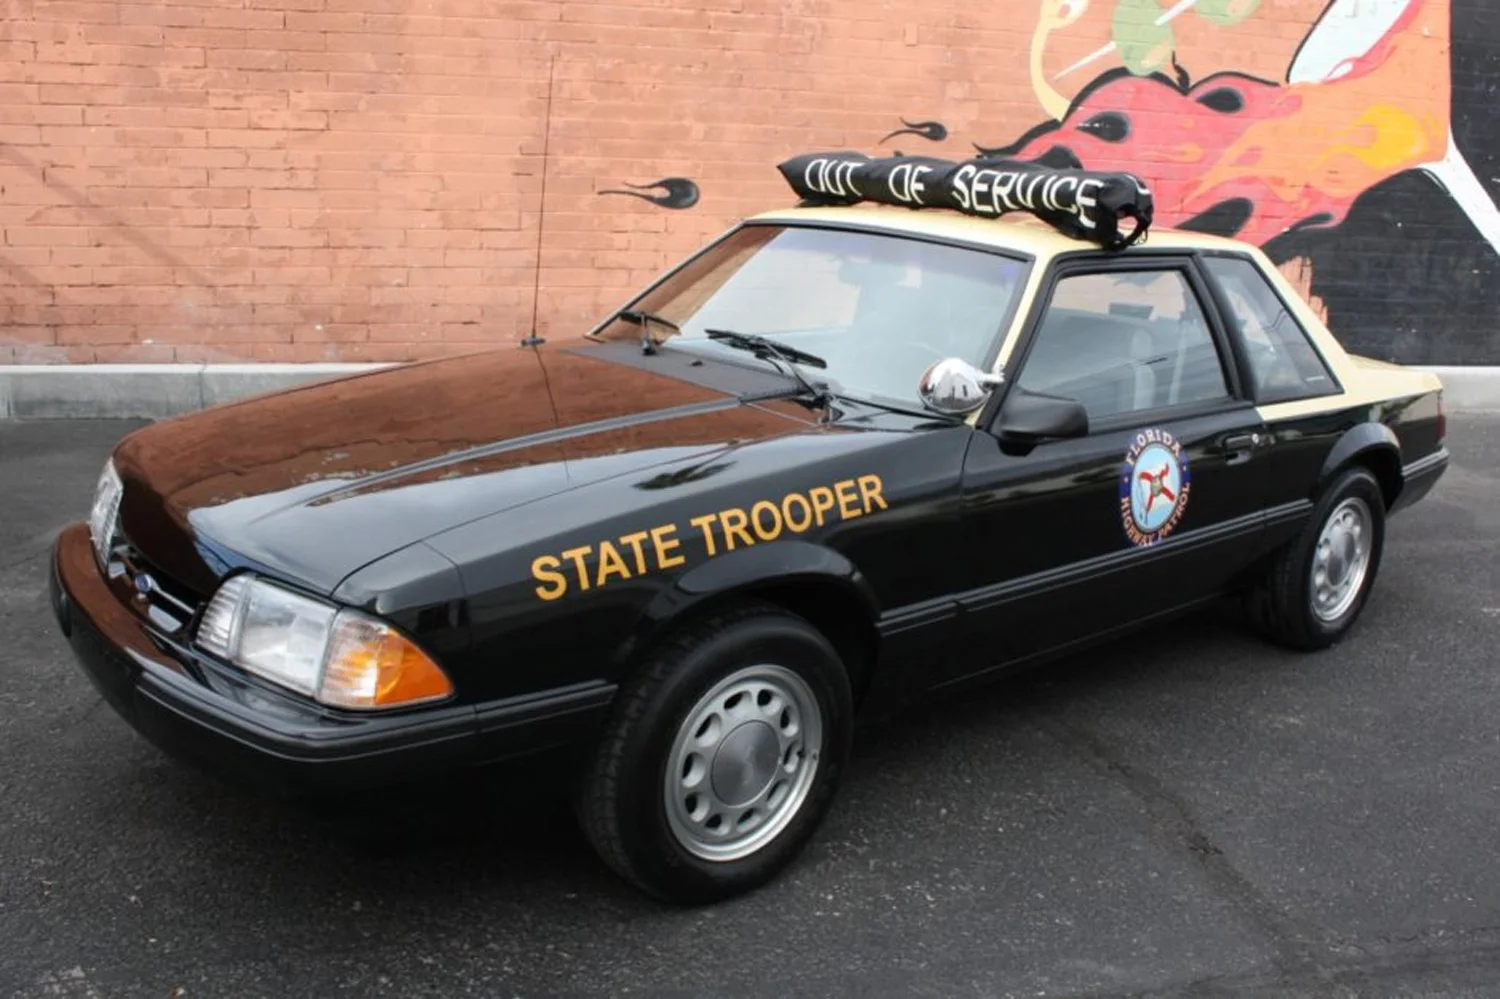 1992 Ford Mustang SSP Florida Patrol Car Is Ready For Duty: Video